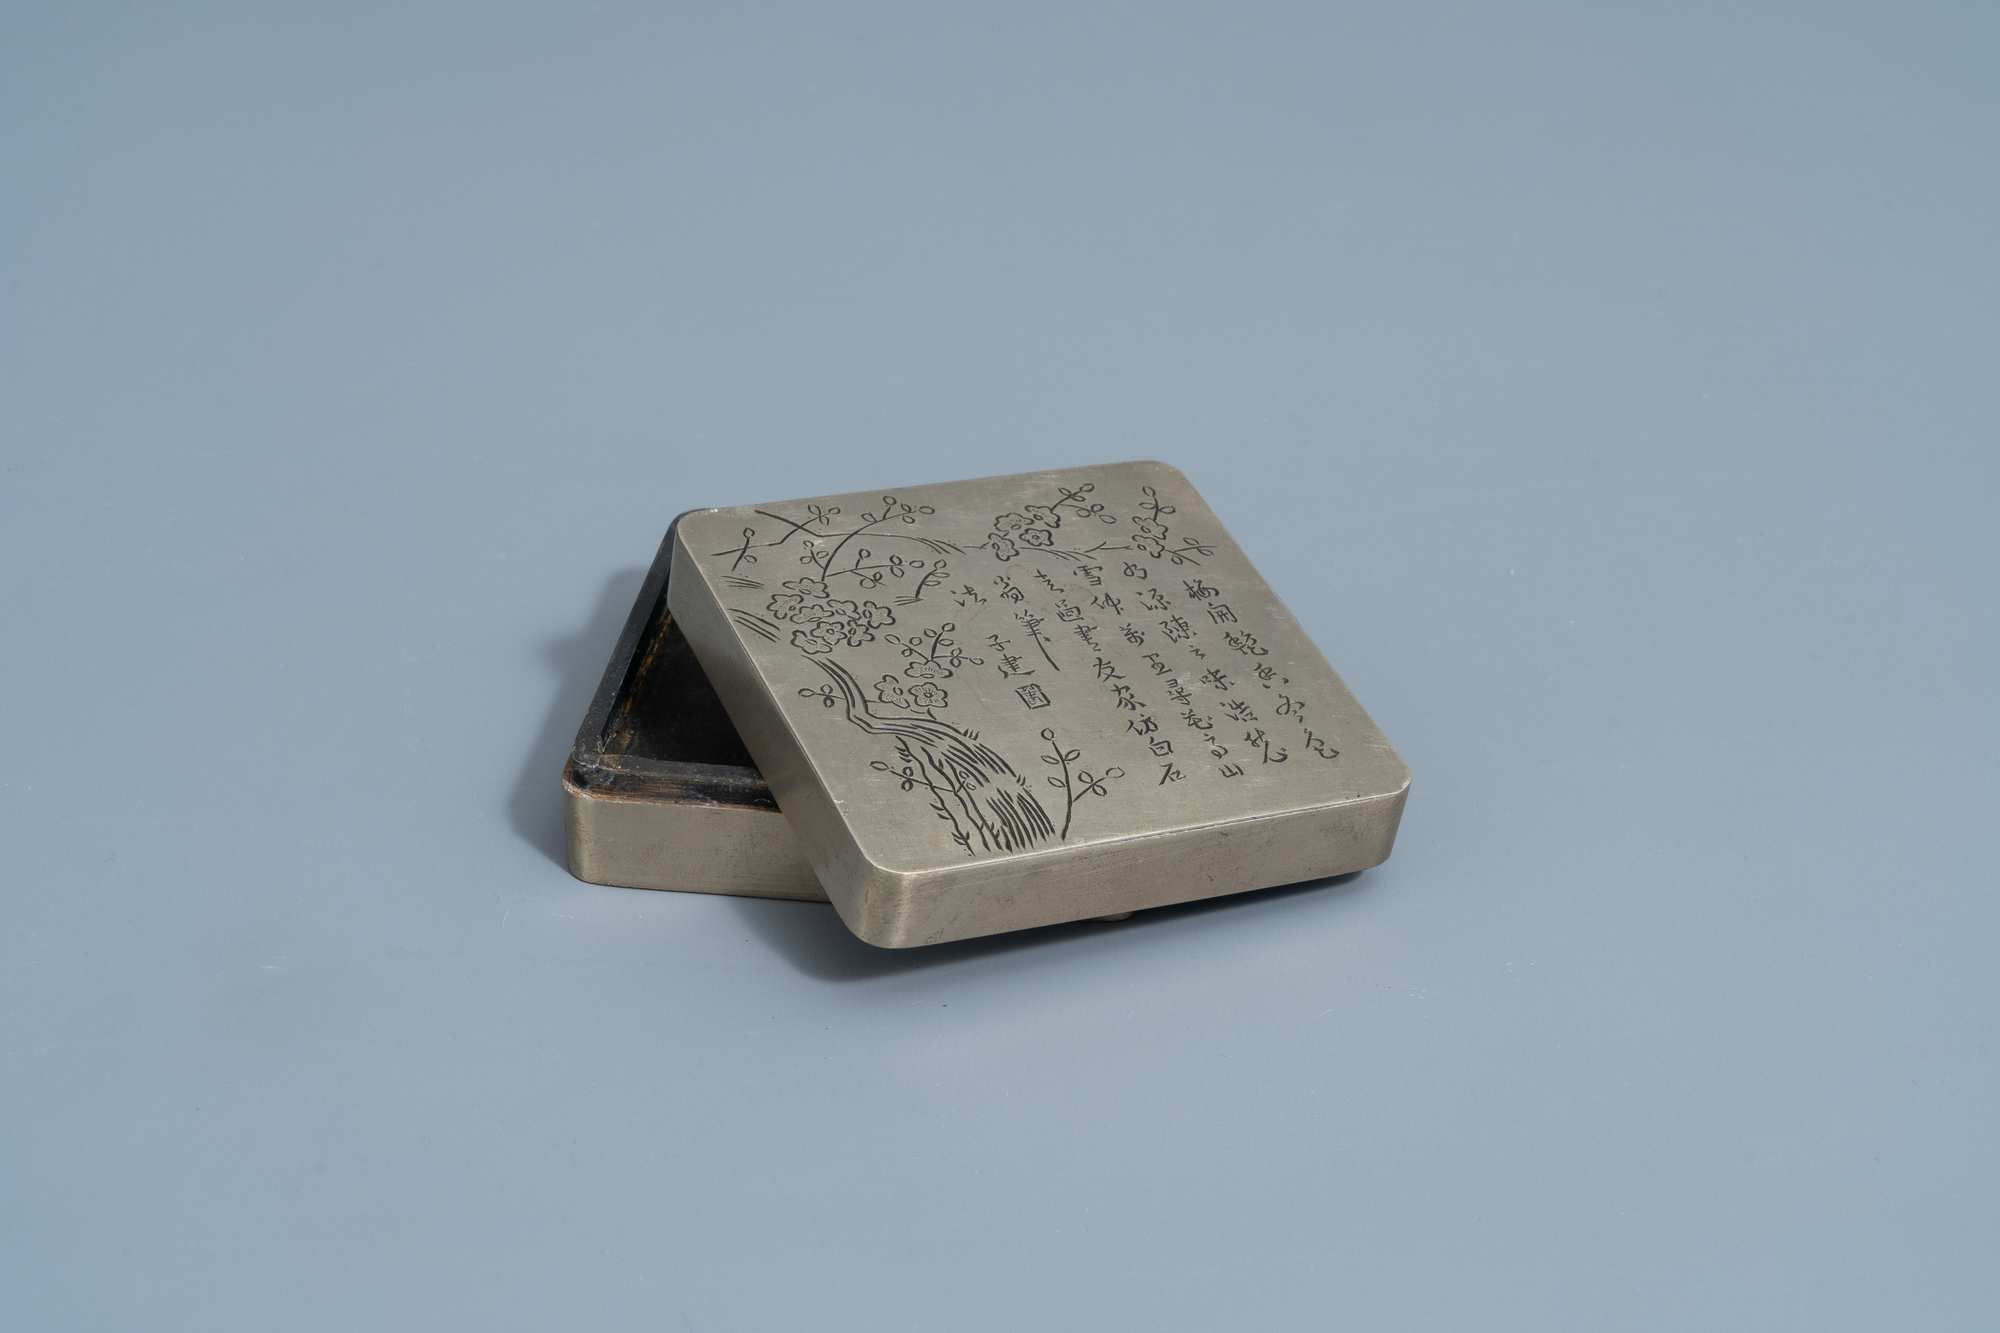 A Chinese square paktong metal scholar's ink box with calligraphy and floral design, marked, 20th C. - Image 3 of 9